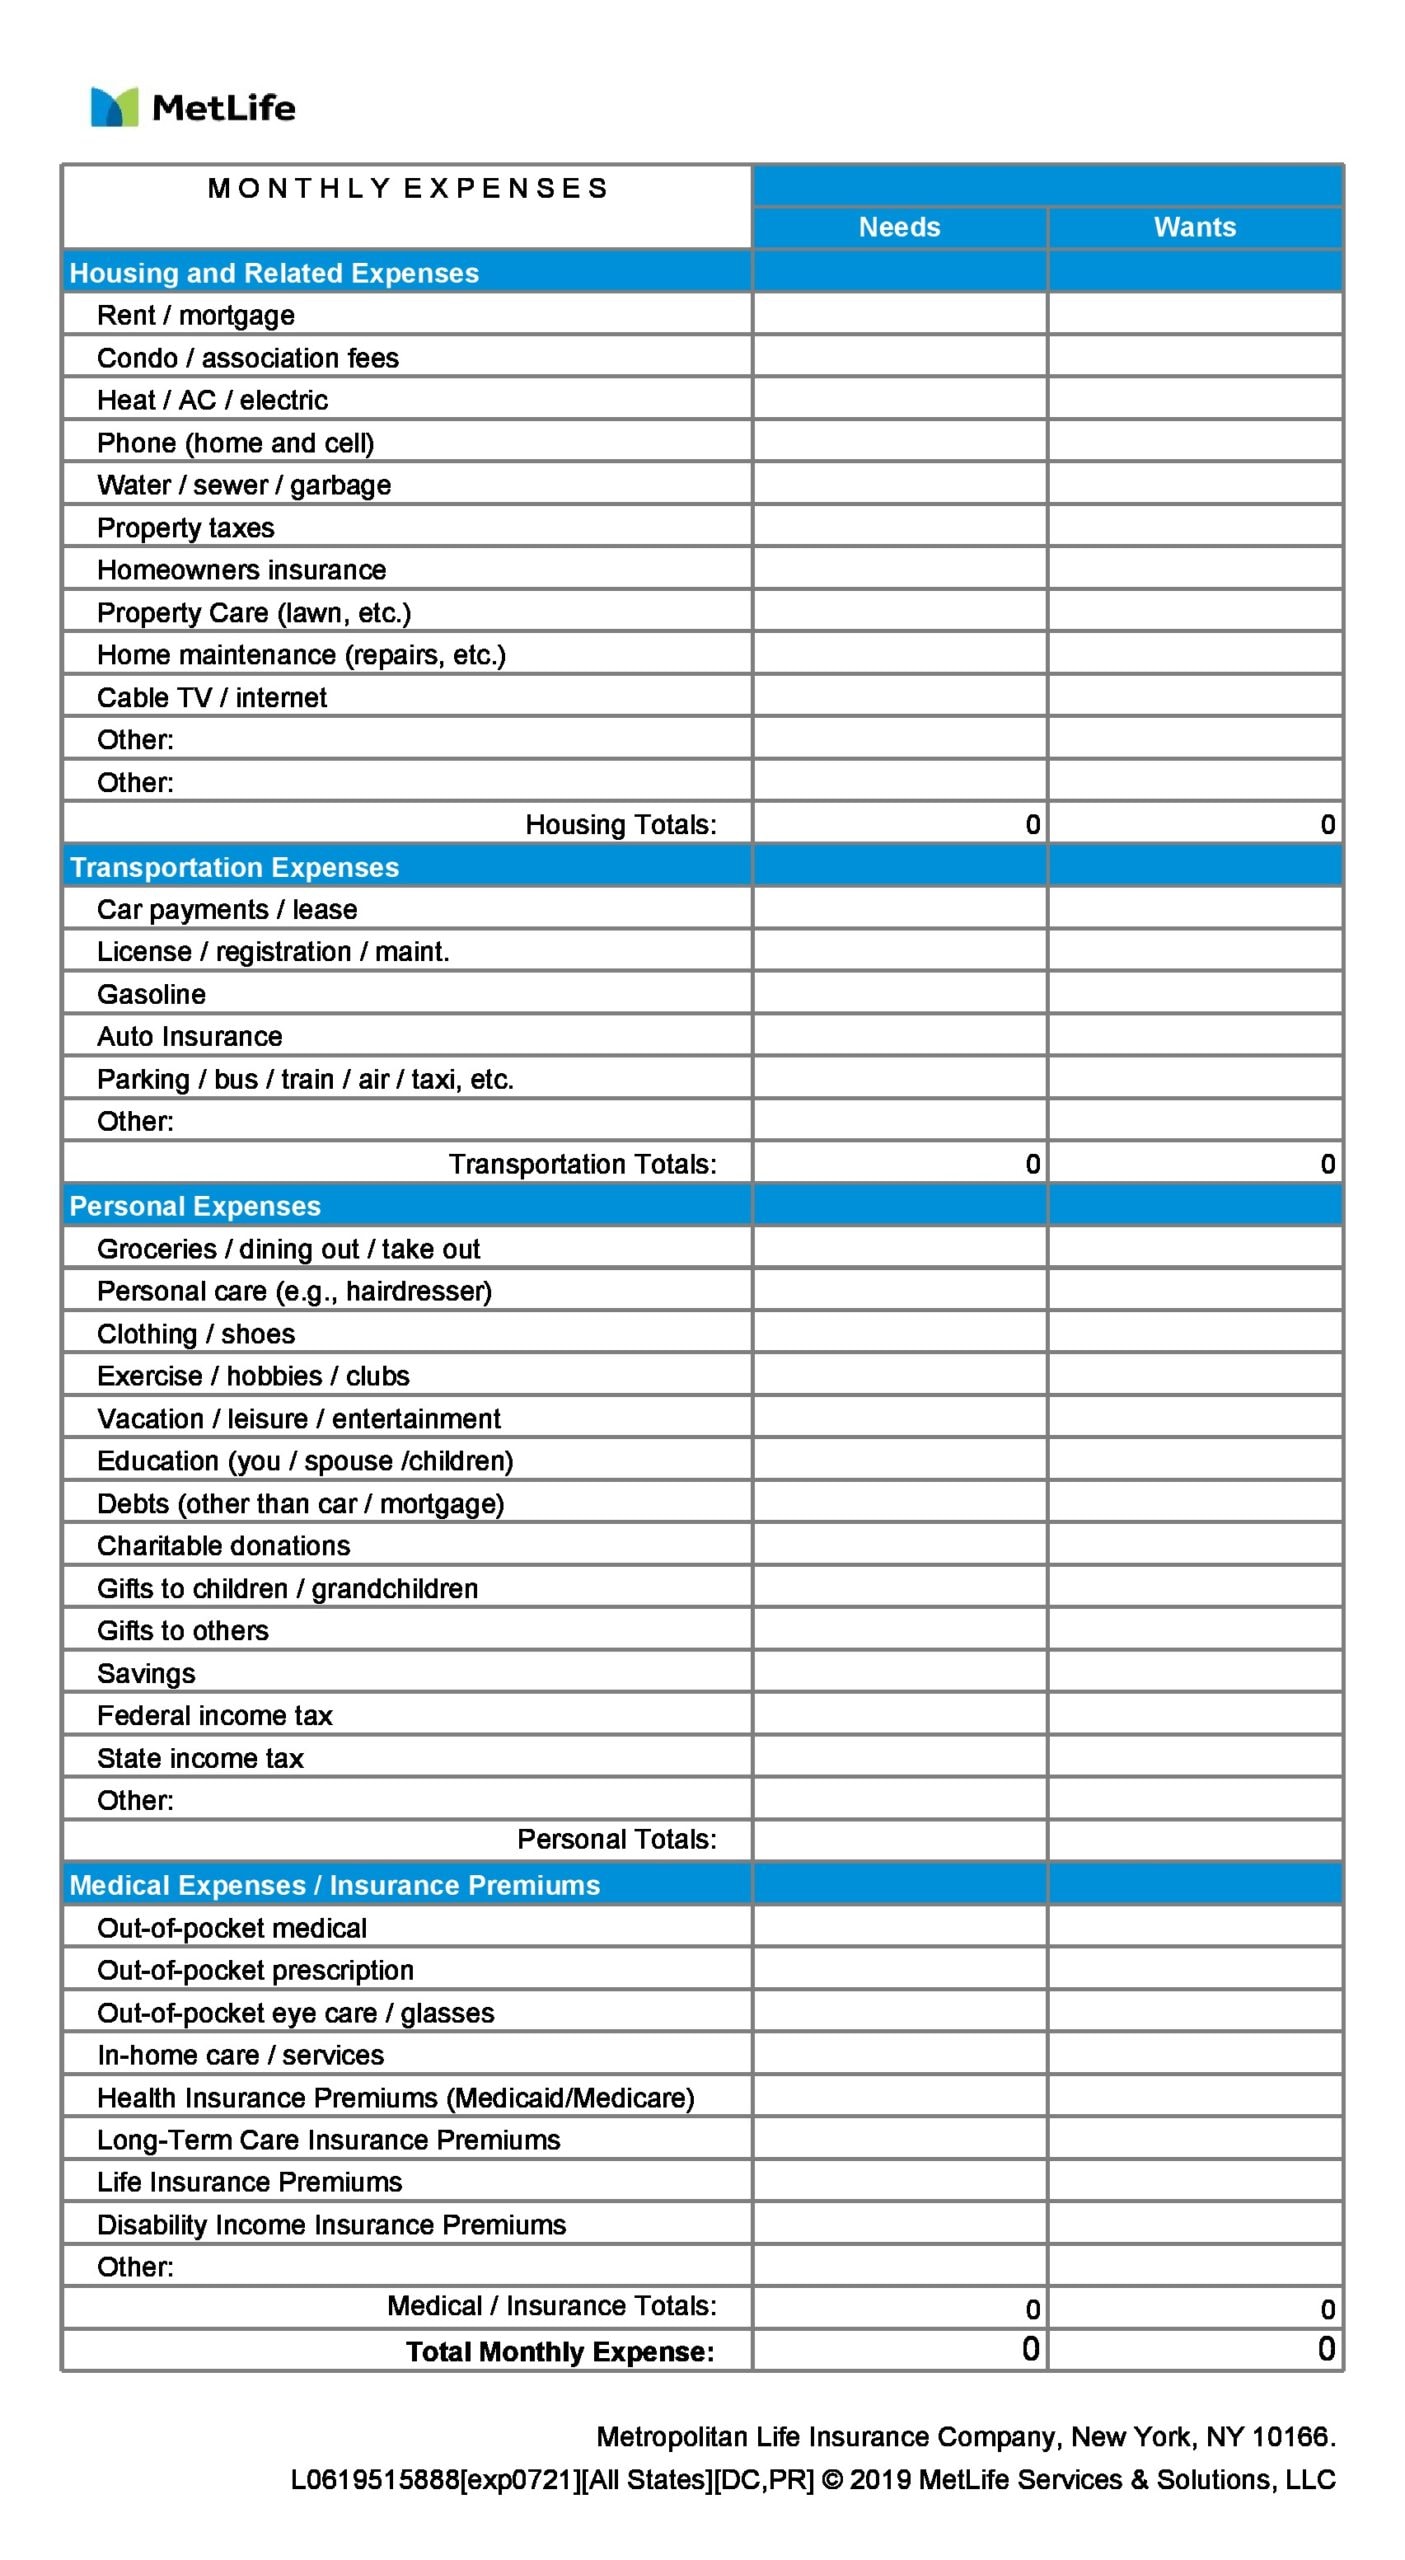 30 Effective Monthly Expenses Templates ( Bill Trackers)